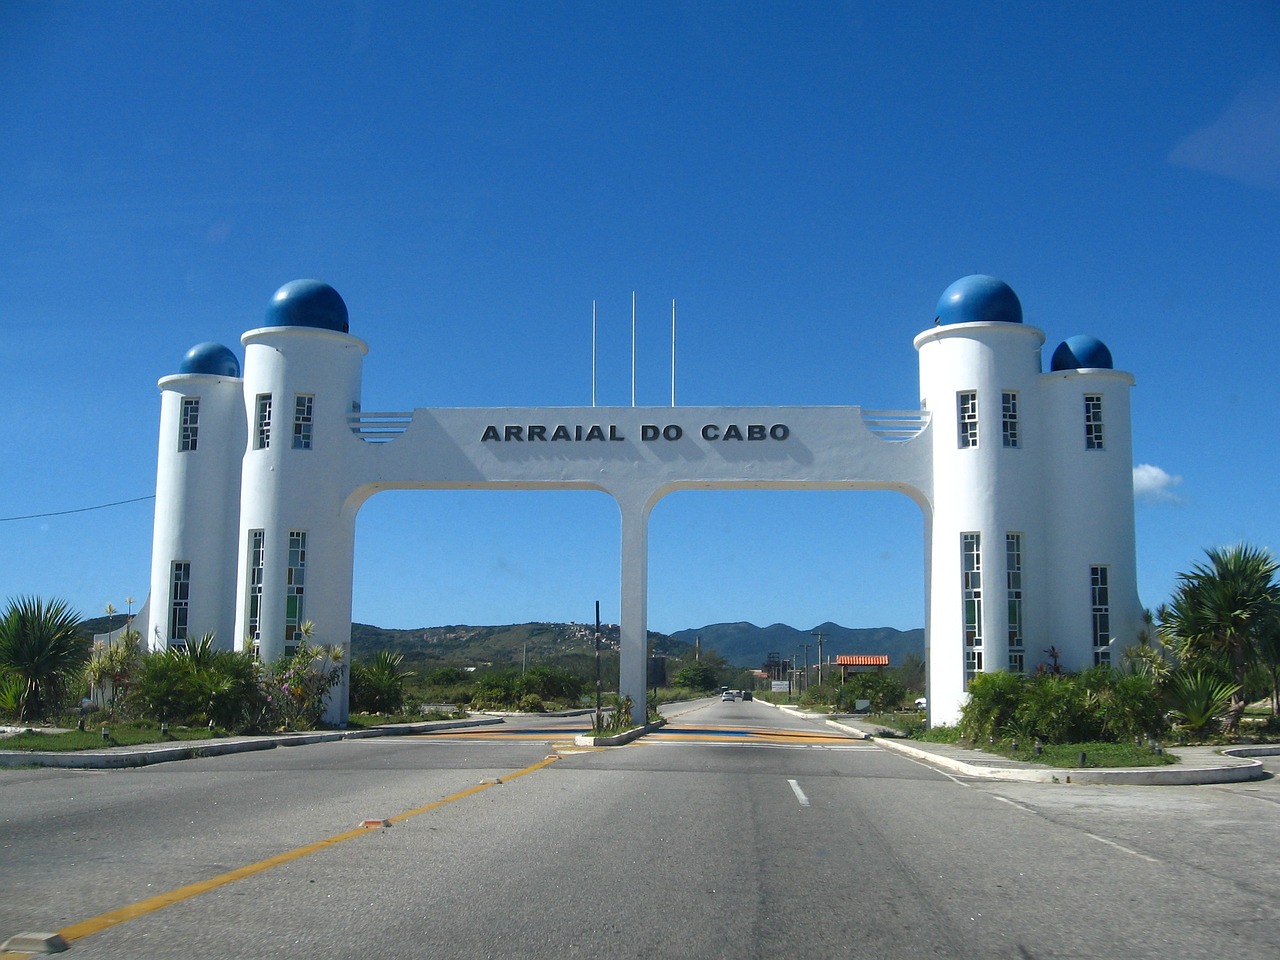 where is located arraial do cabo